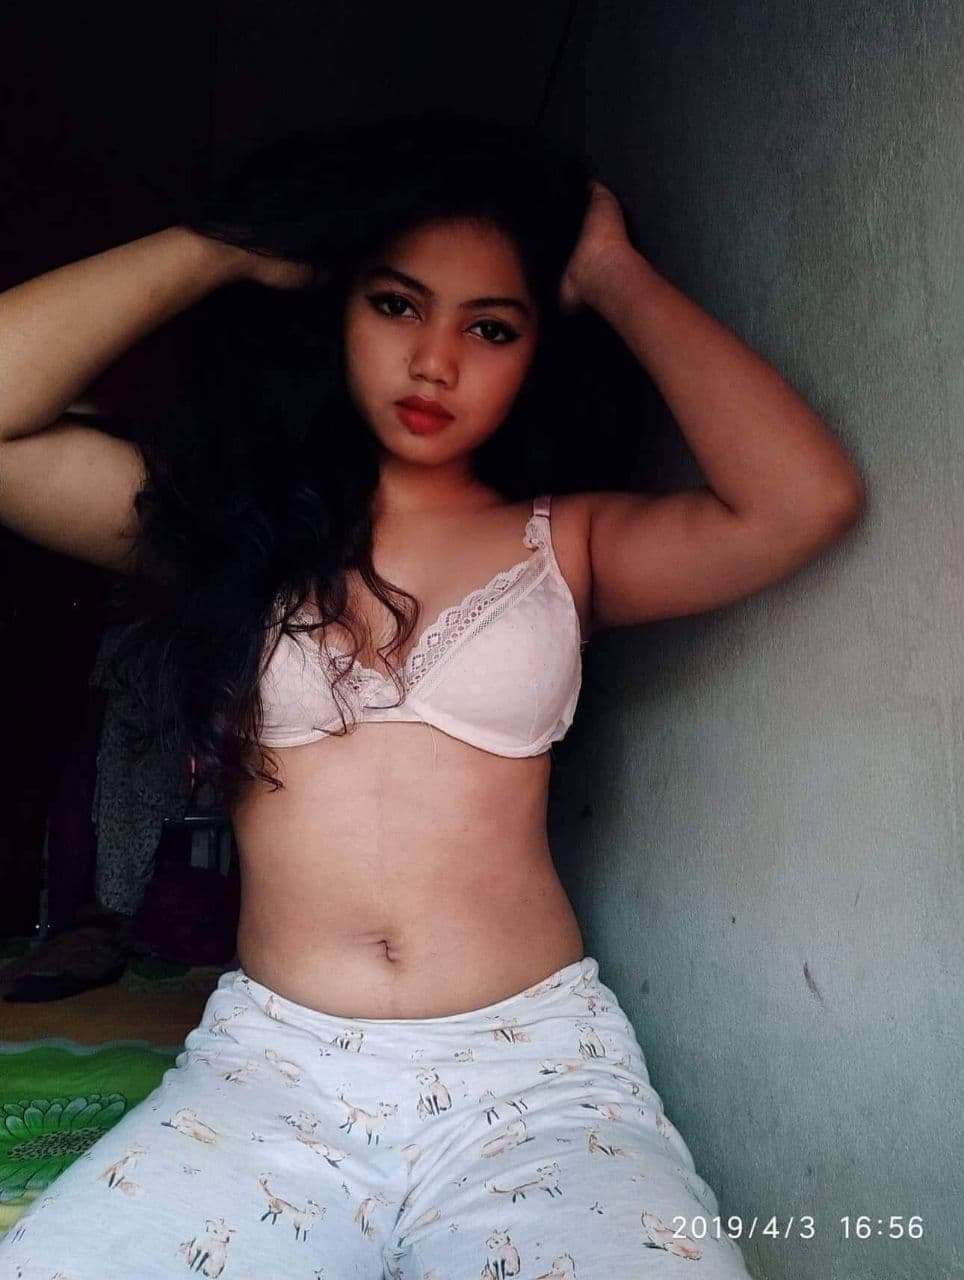 Indian College Girl (18 pictures) - Shooshtime